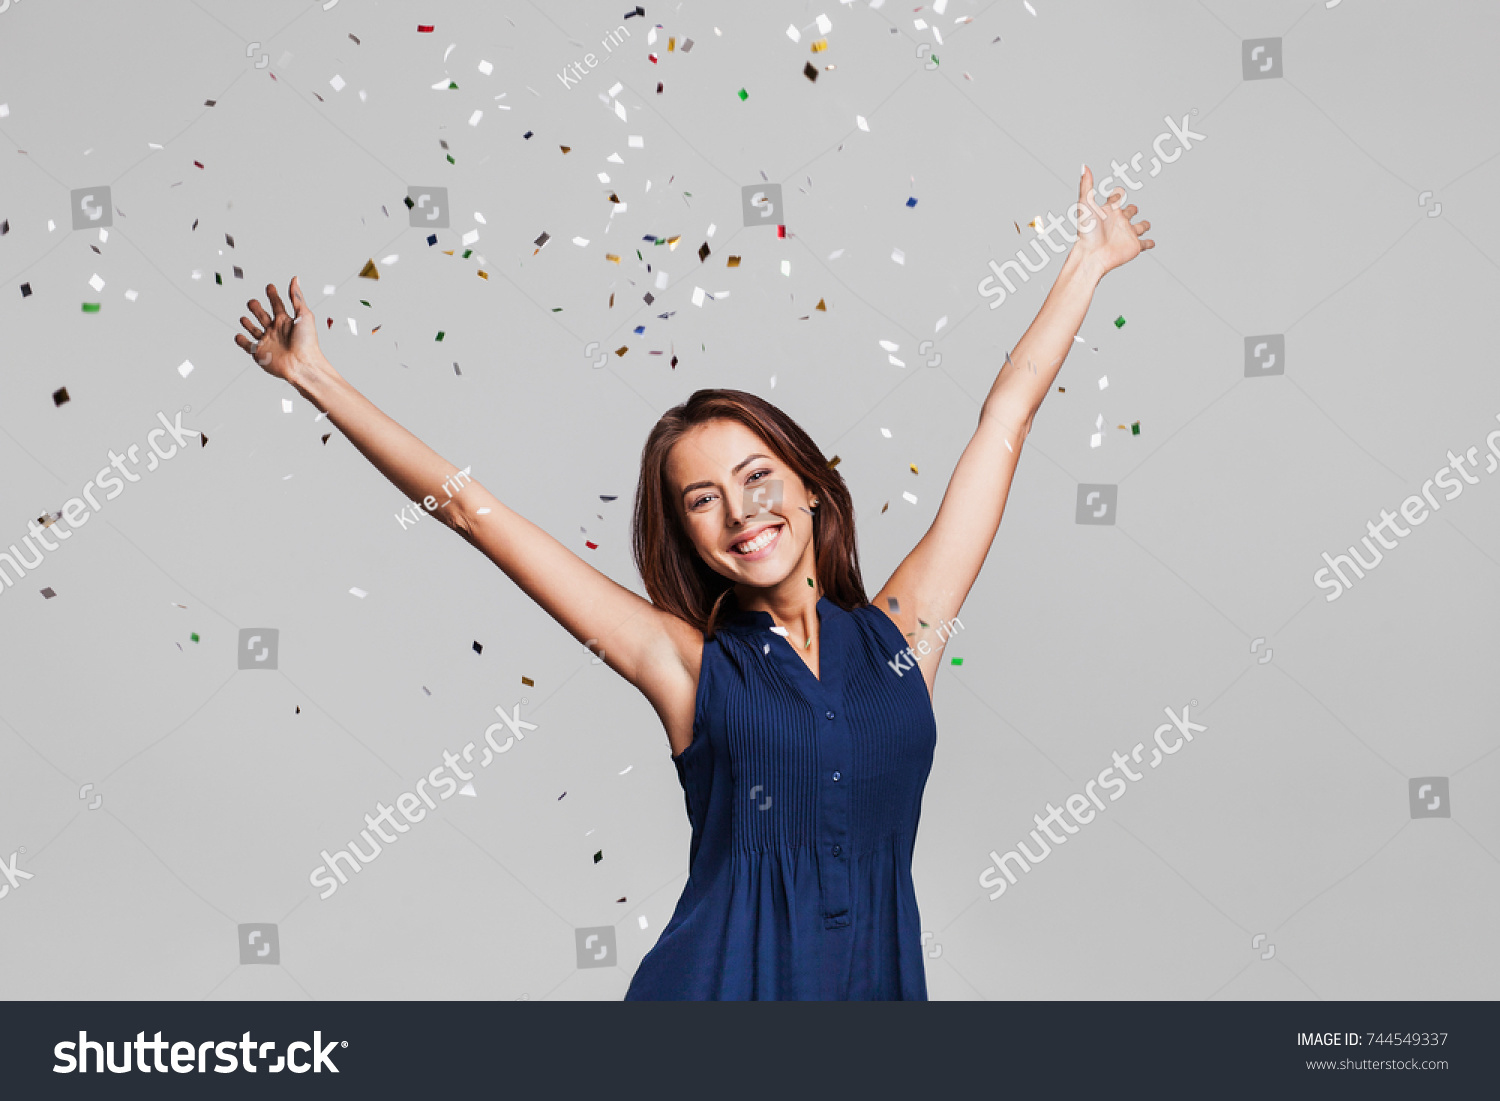 Beautiful happy woman at celebration party with confetti falling everywhere on her. Birthday or New Year eve celebrating concept #744549337